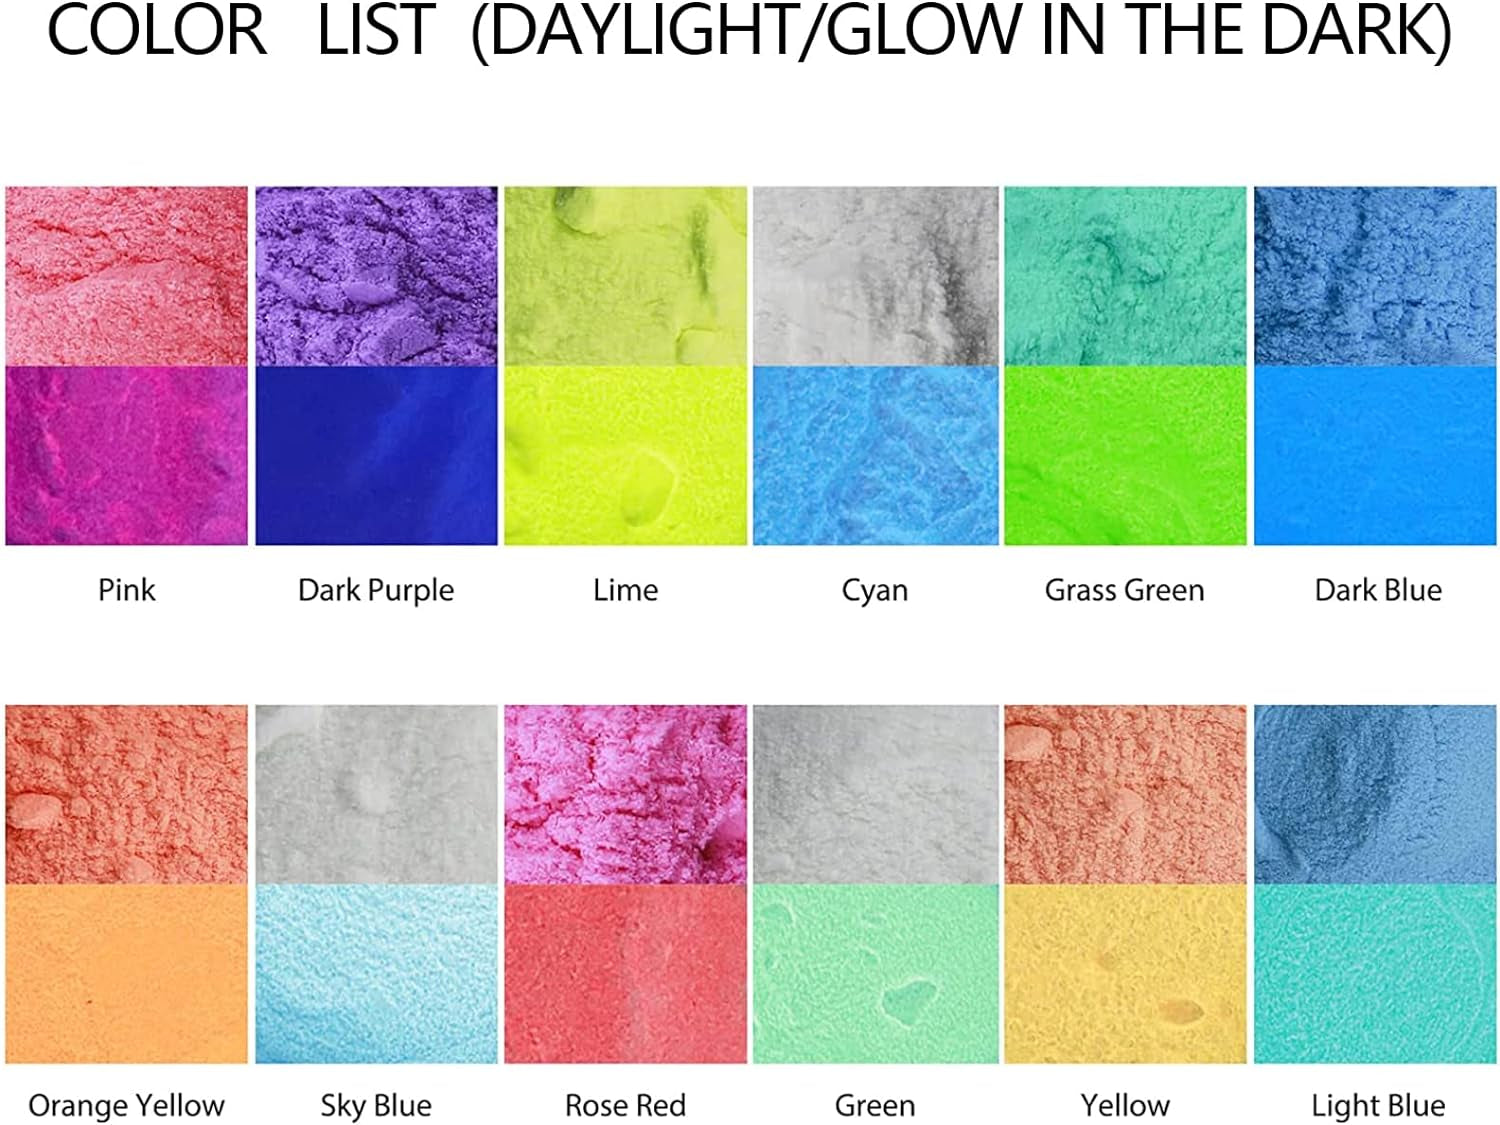 Glow in the Dark Pigment Powder, 12 Color 0.7Oz/20G Epoxy Resin Luminous Powder Set for Resin Art, Nail Art, Acrylic Paint and DIY Crafts, Safe and Long Lasting